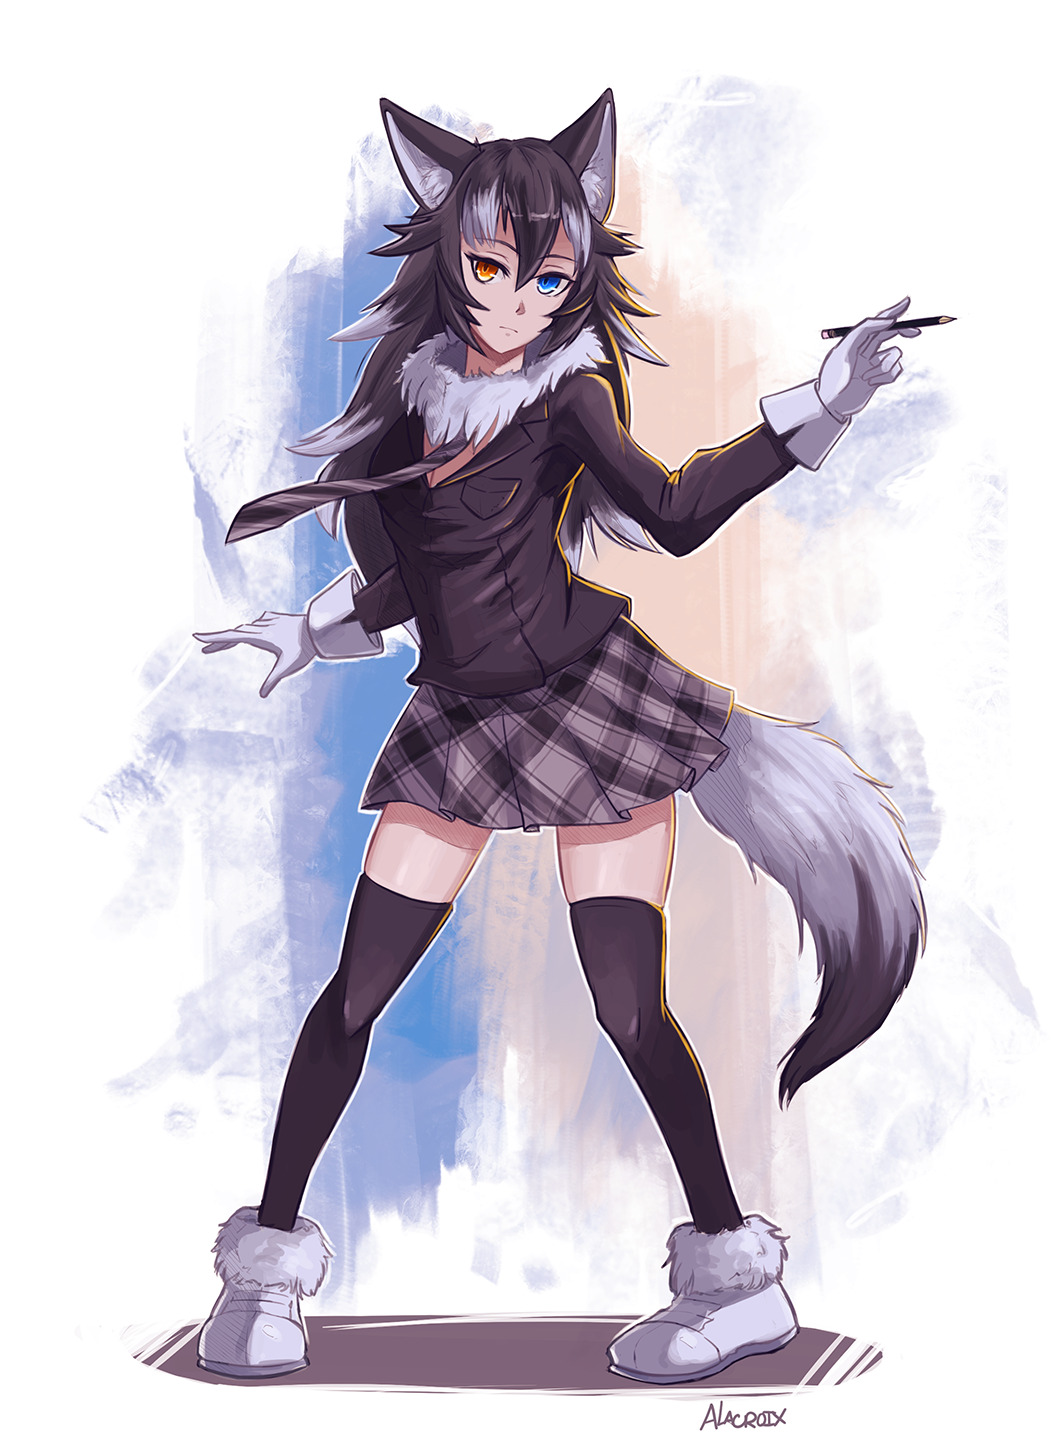 Another commission that I did recently! Grey Wolf... - Alacroix's Art Blog